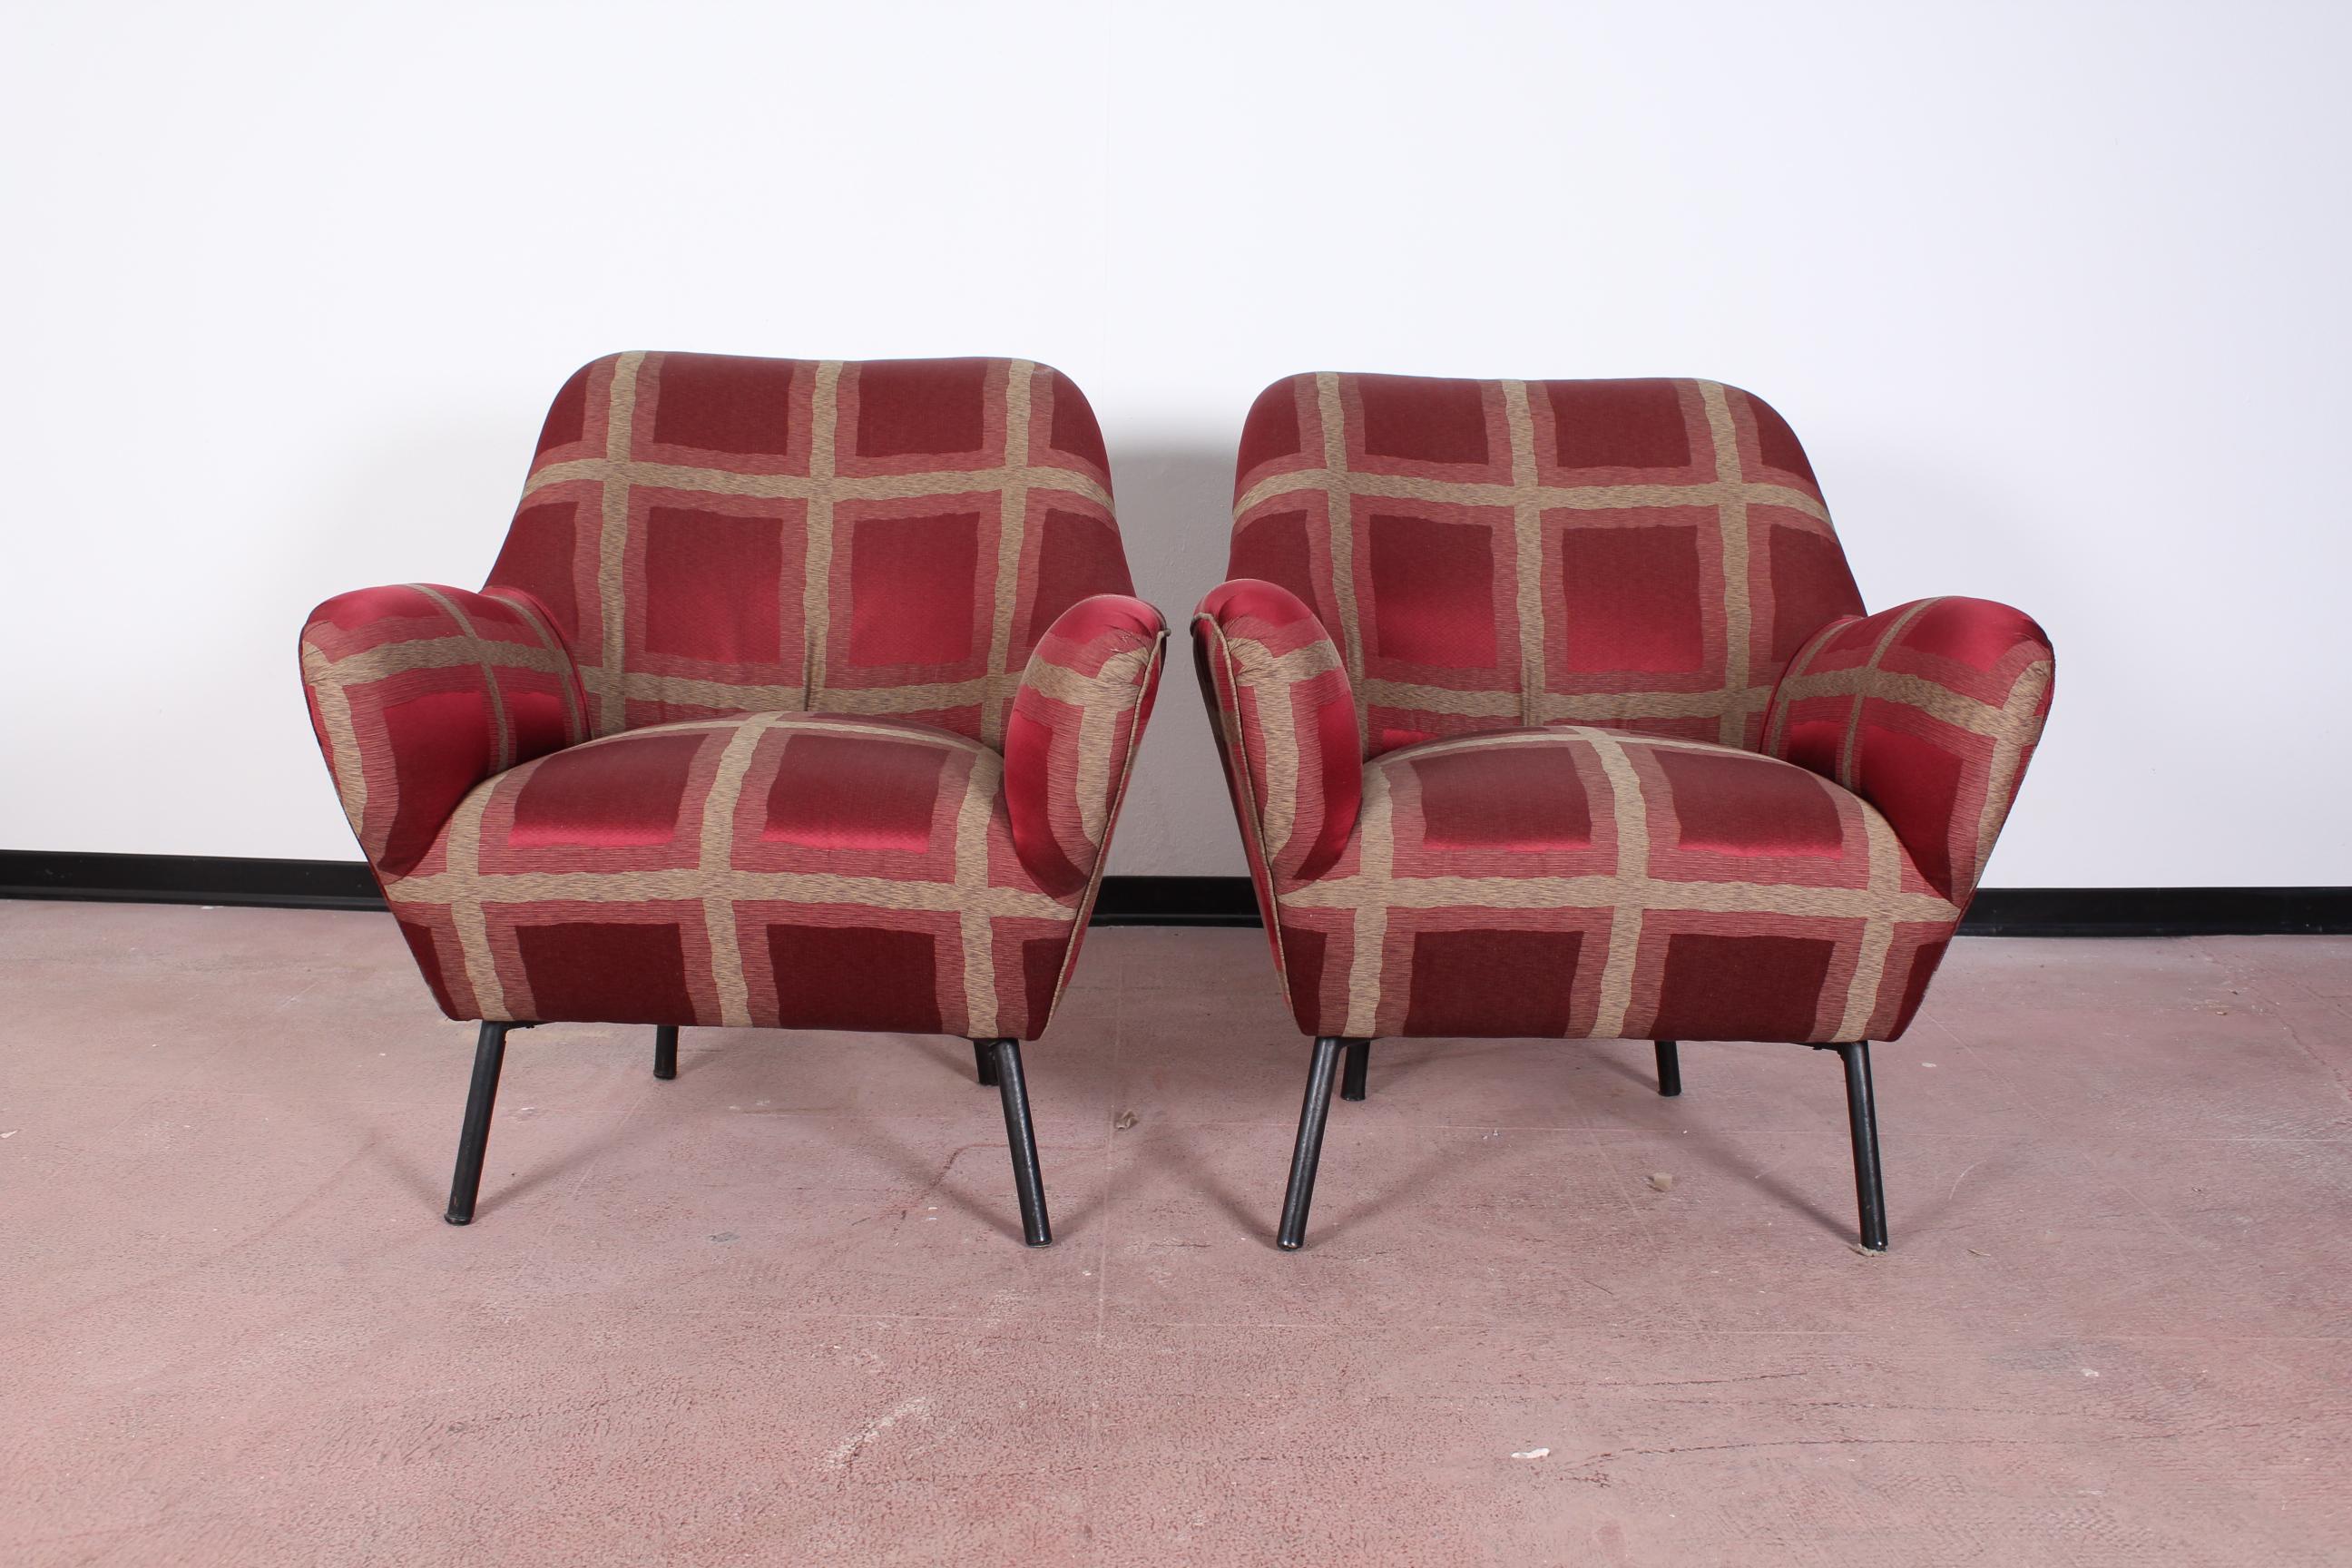 Beautiful pair of 50s armchairs attributed to Osvaldo Borsani, with structure and feet in wood and upholstery in red satin worked with extended squares.
Wear consistent with age and use.